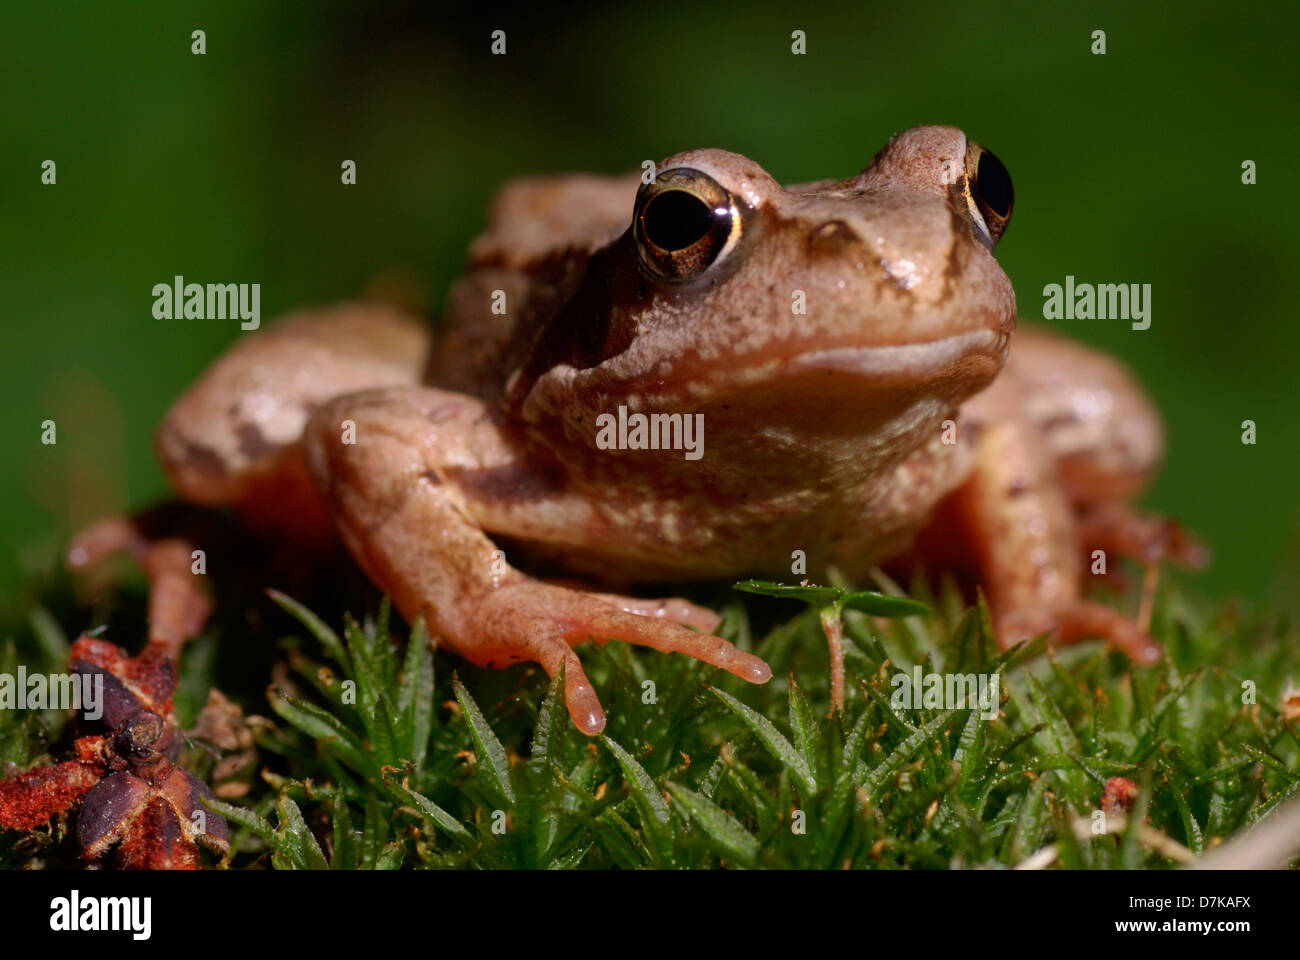 Big brown frog sitting on Green grass Banque D'Images